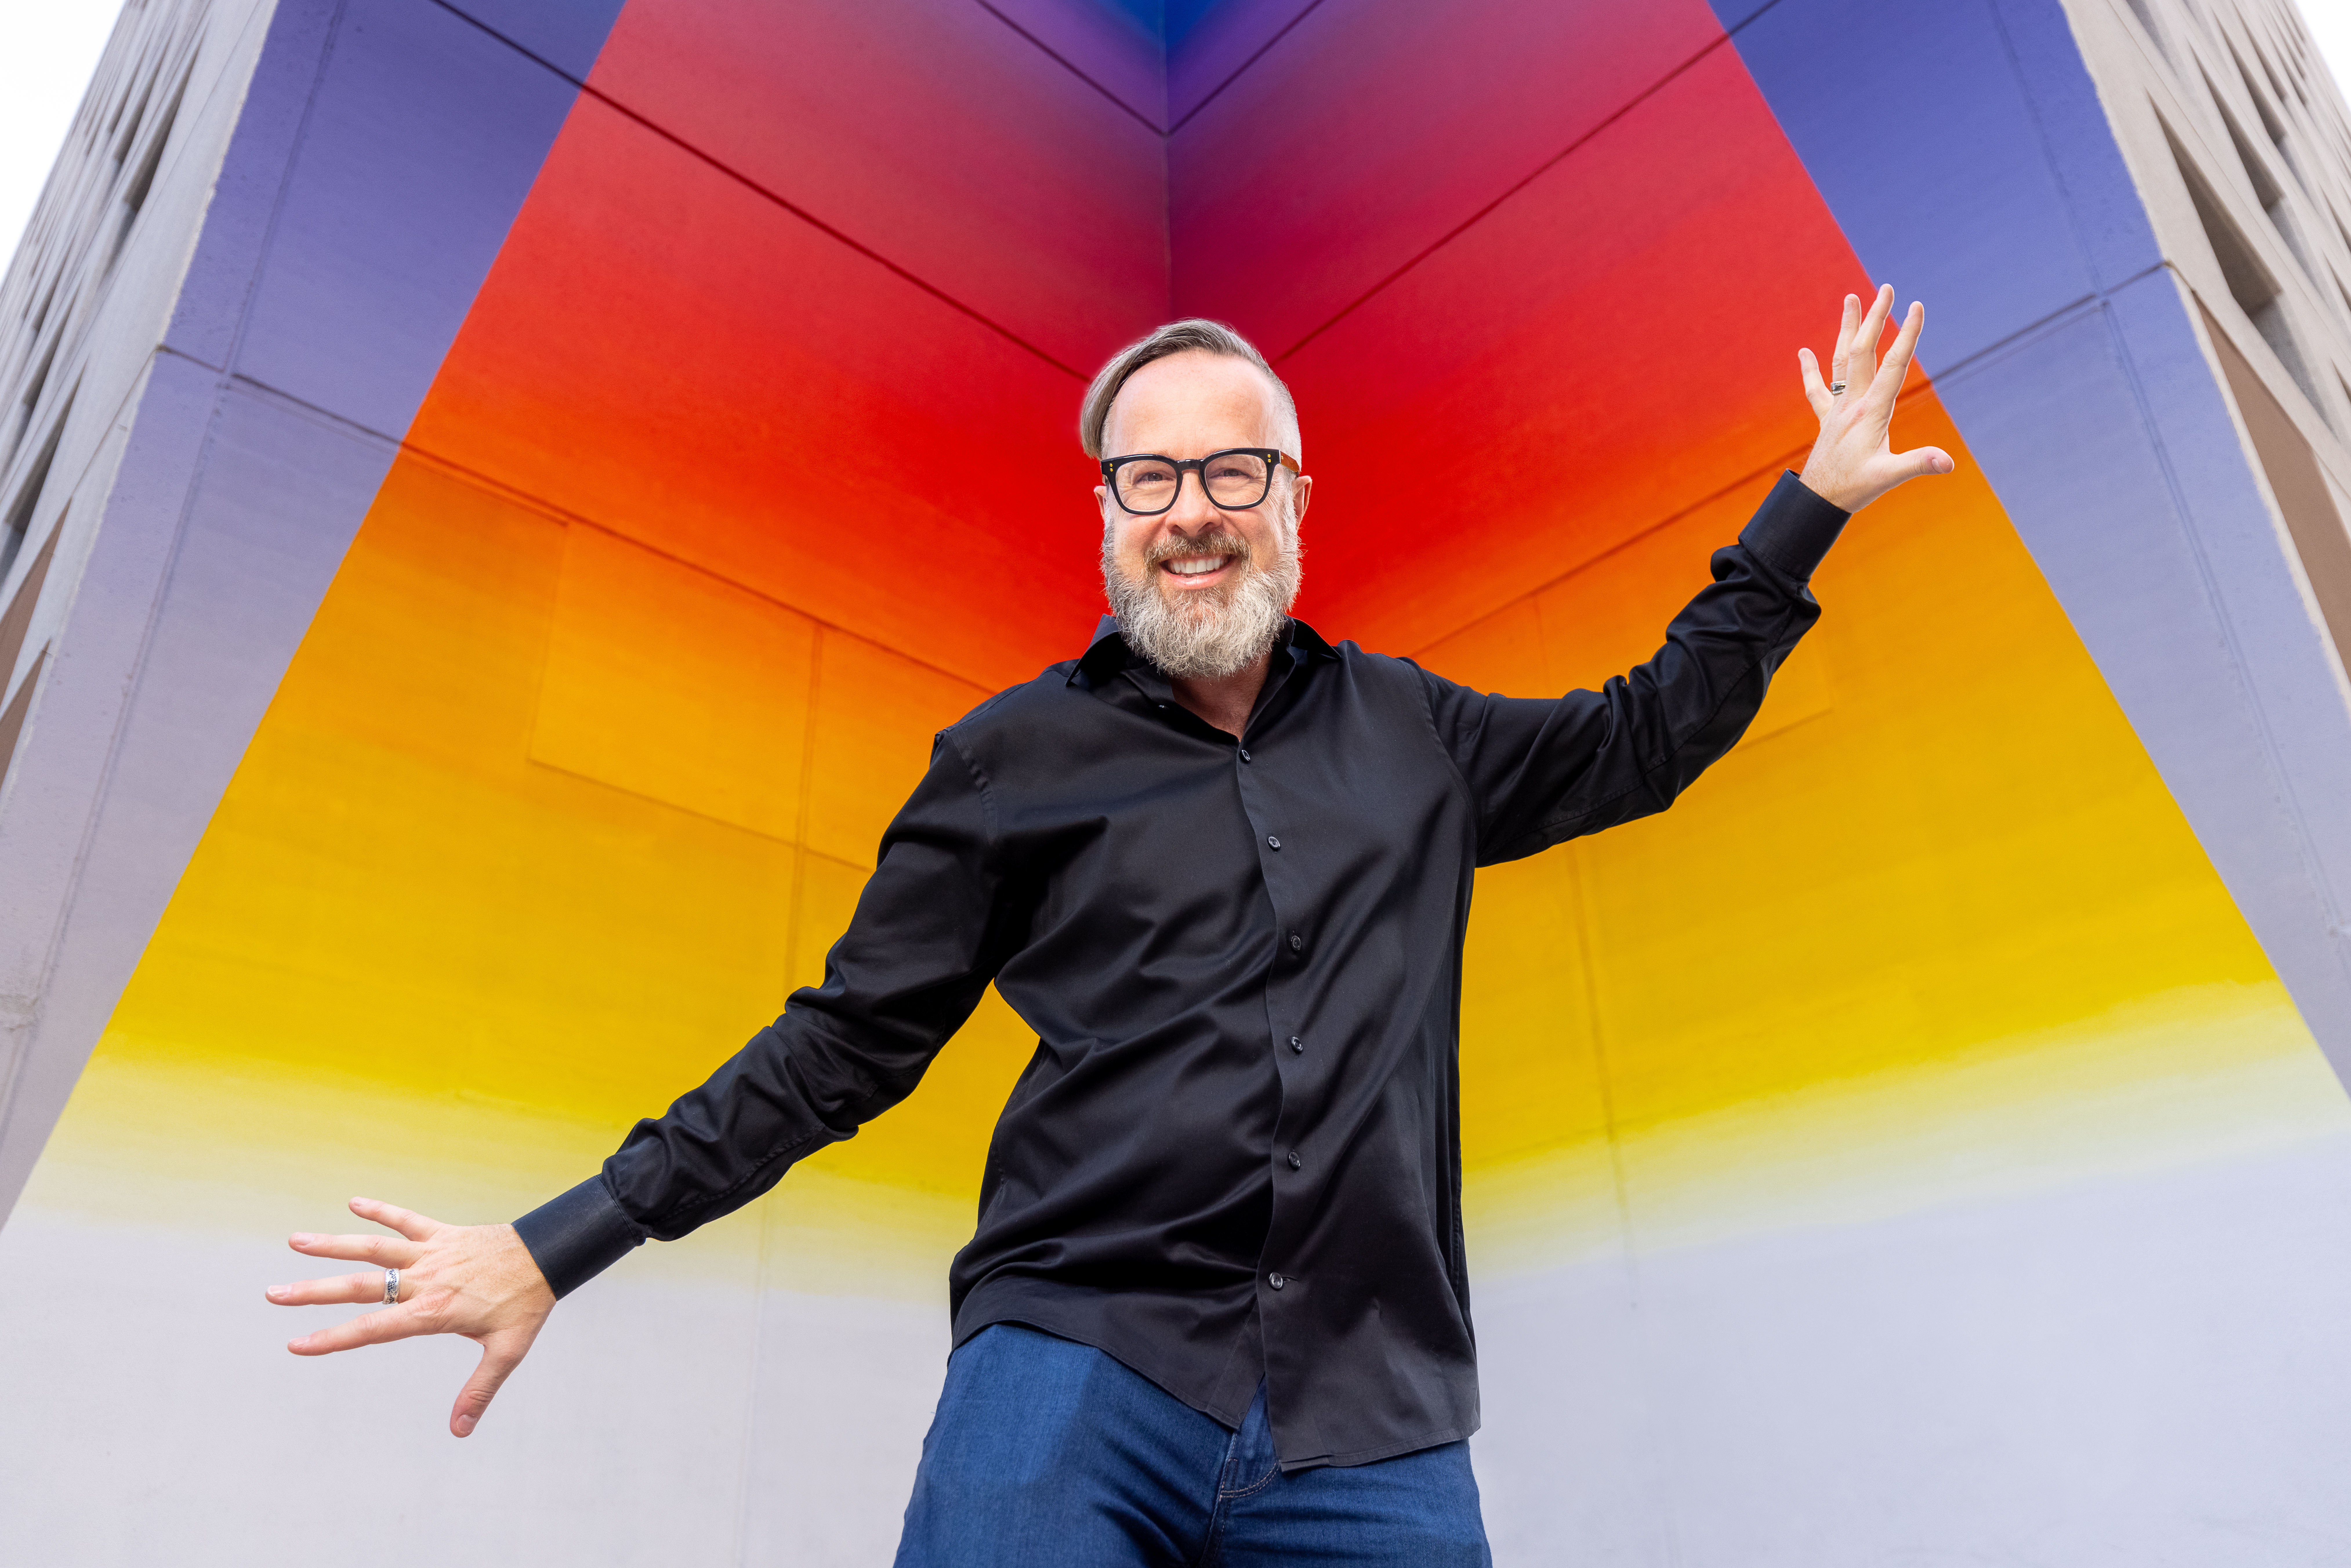 Austin-based serial entrepreneur Will Hurley posing with arms outstretched in front of a wall